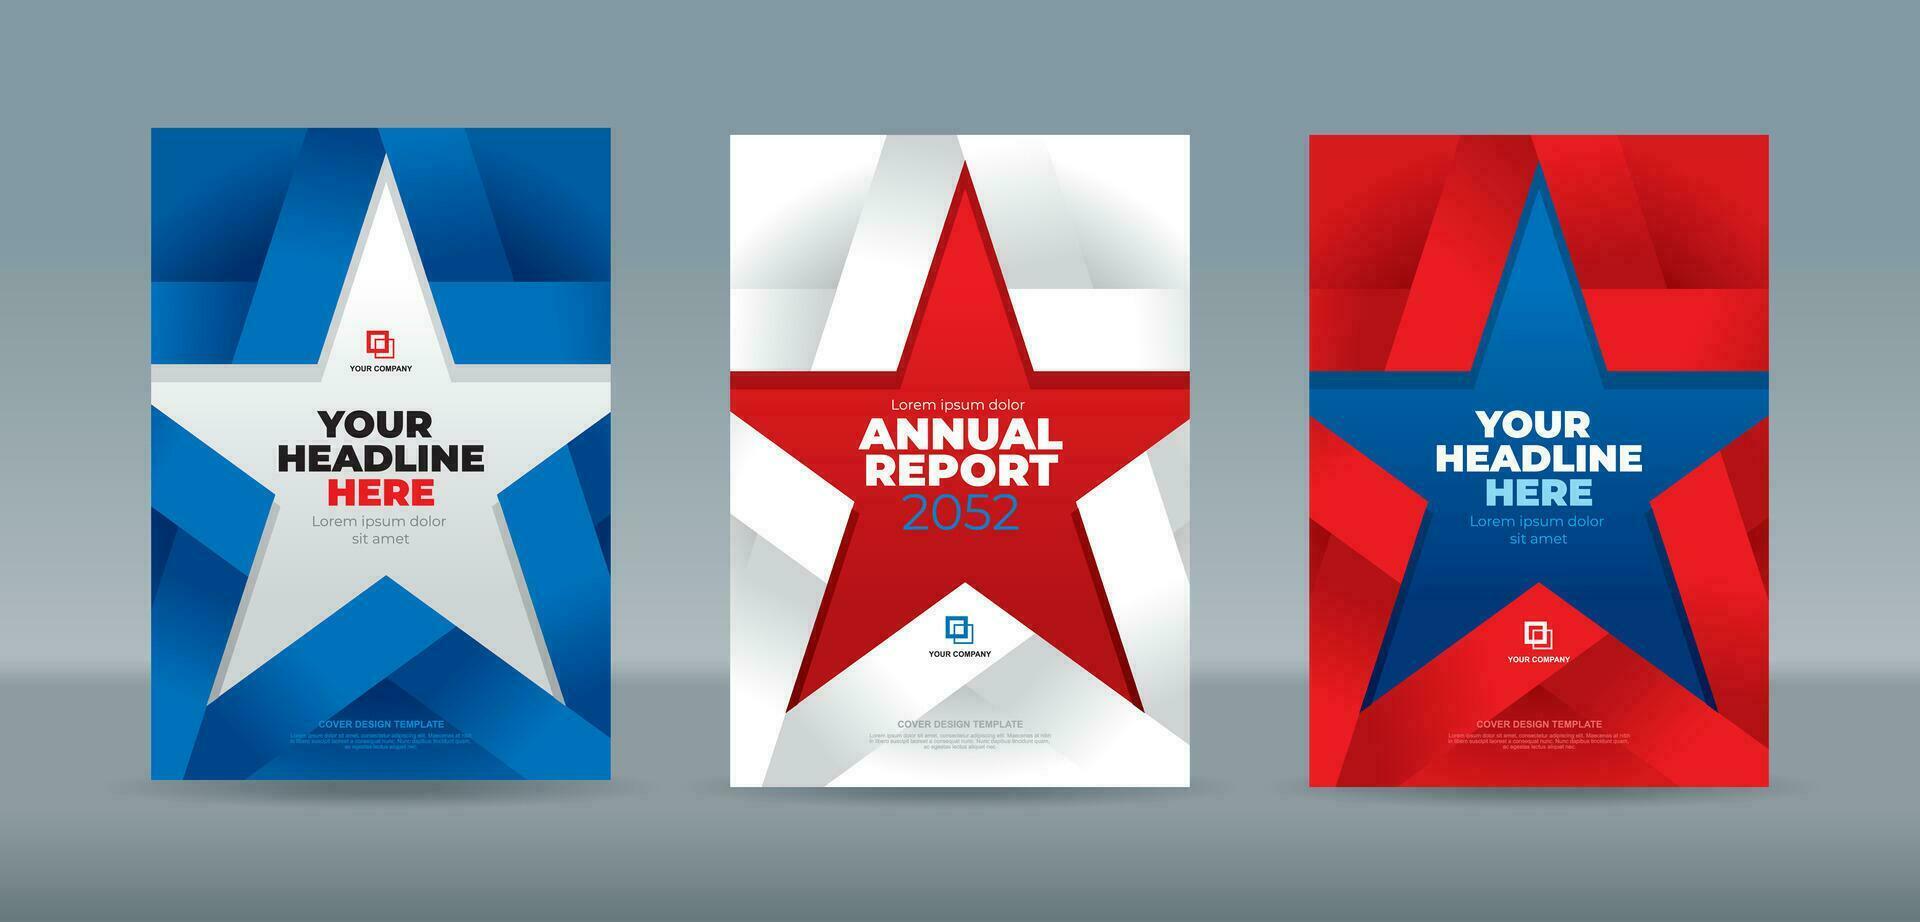 Blue, white and red illustration of a folded ribbon in the shape of a five-sided star on gradation background. A4 size book cover template for annual report, magazine, booklet, portfolio, brochure vector